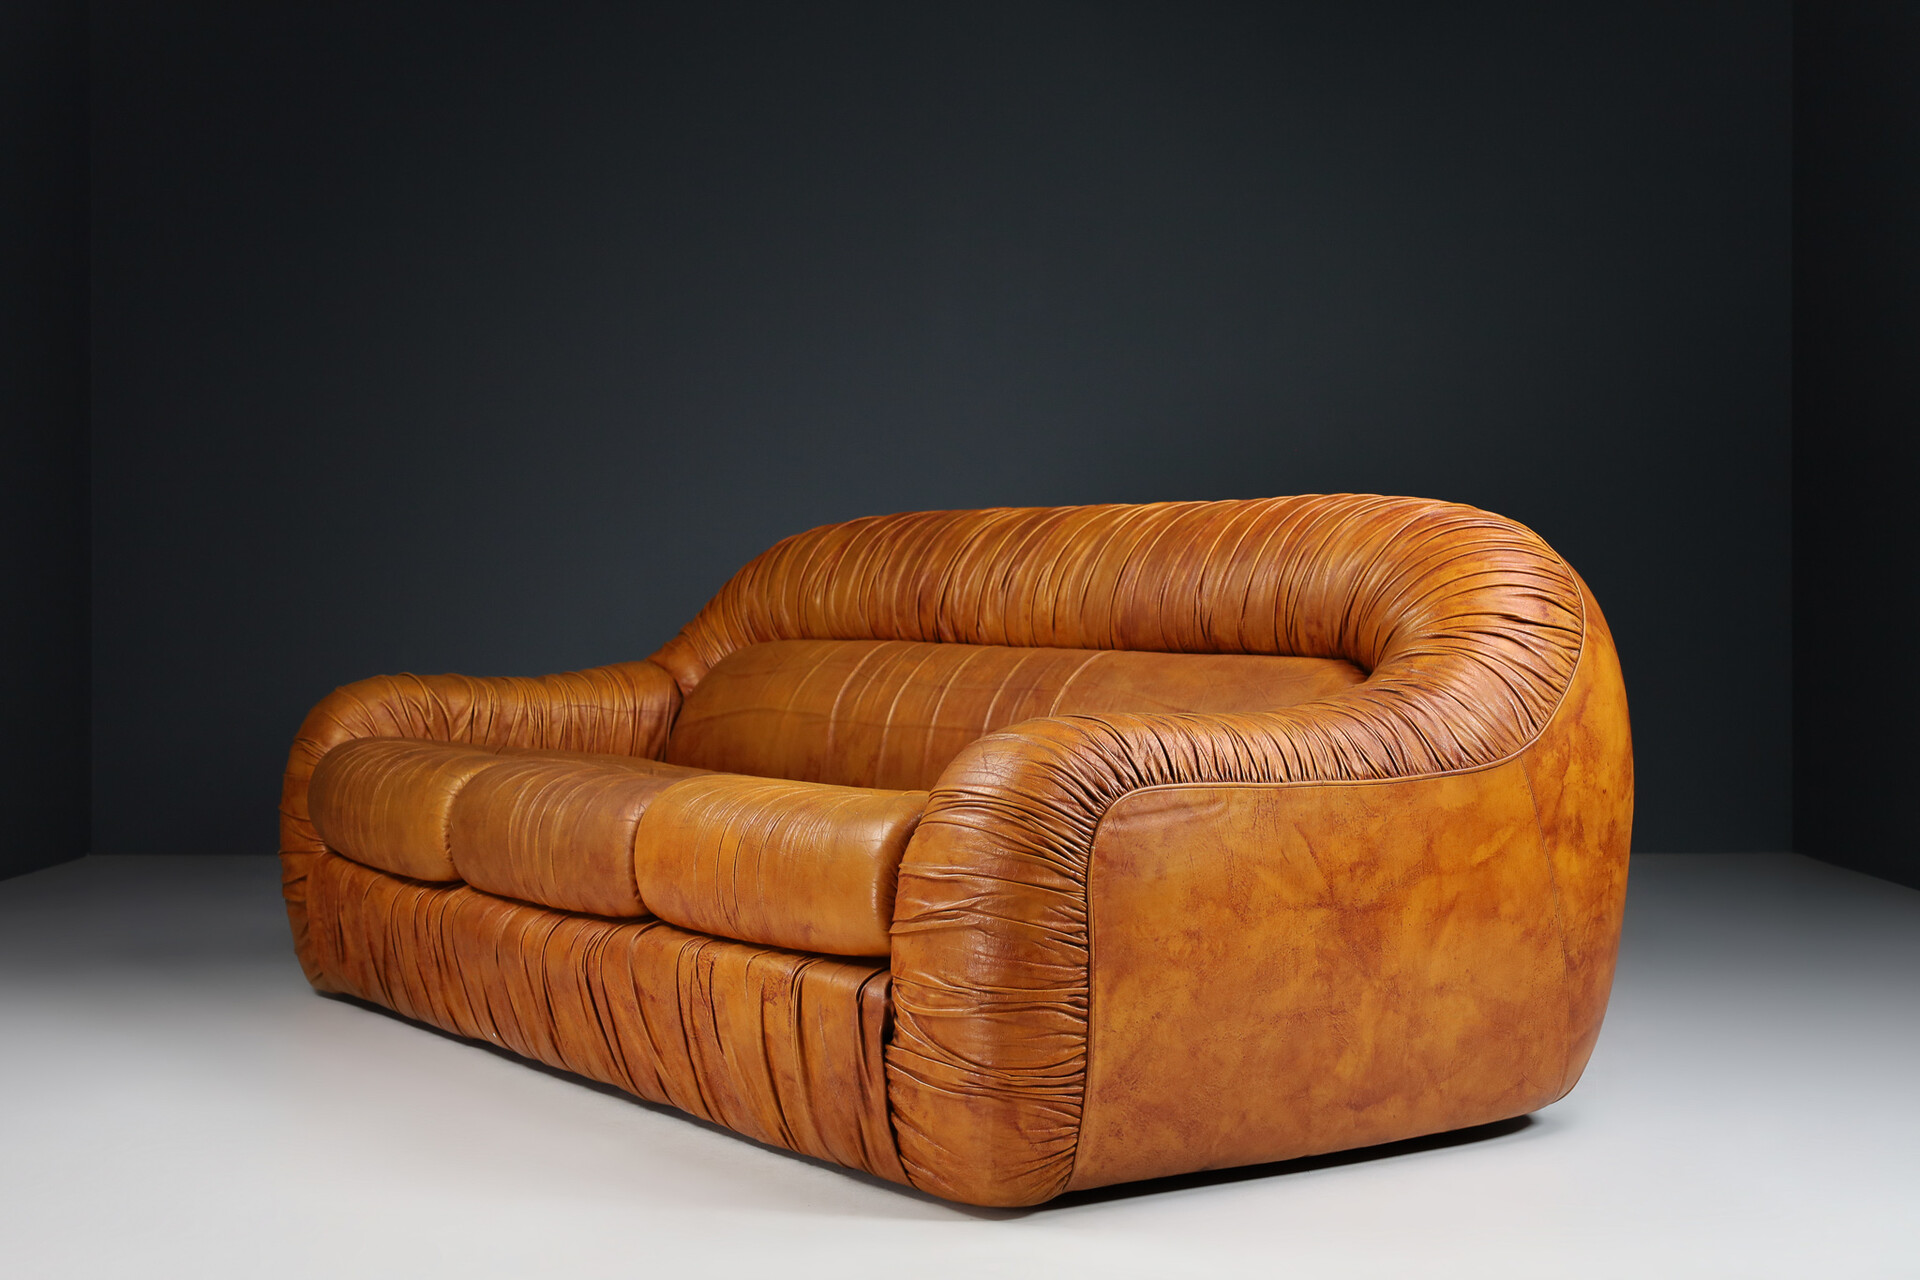 Mid century modern Lounge sofa original in Italy designed Bighinello - 1970s leather, Sofas George - \'Capriccio\' model - Davidowski and Late-20th Eurosalotto, for brown century Seating Benches by